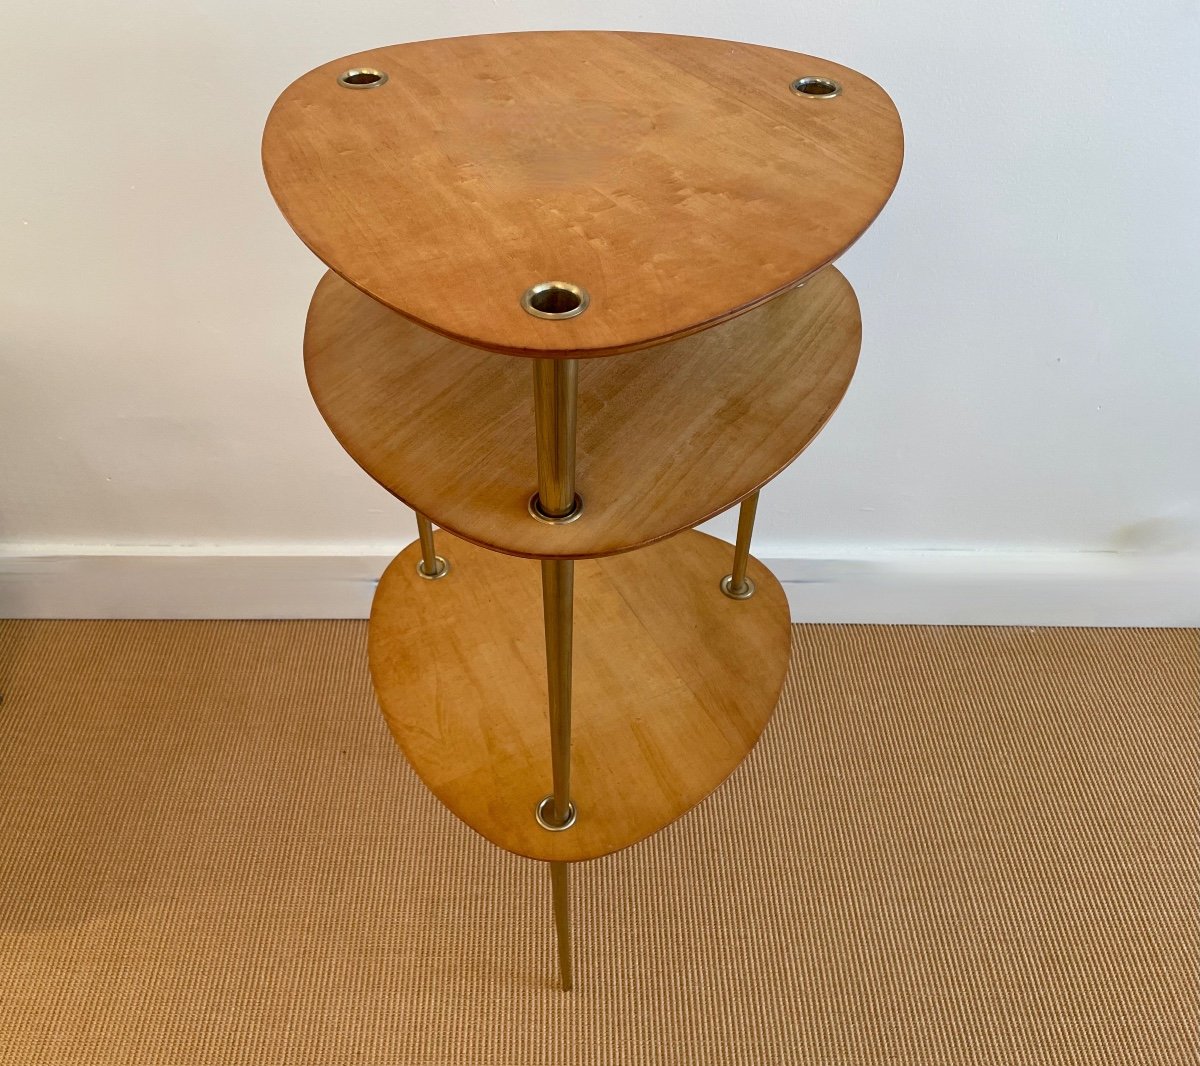 Suite Of 3 "patroy" Nesting Tables By Pierre Cruège For Formes, Circa 1950.-photo-2